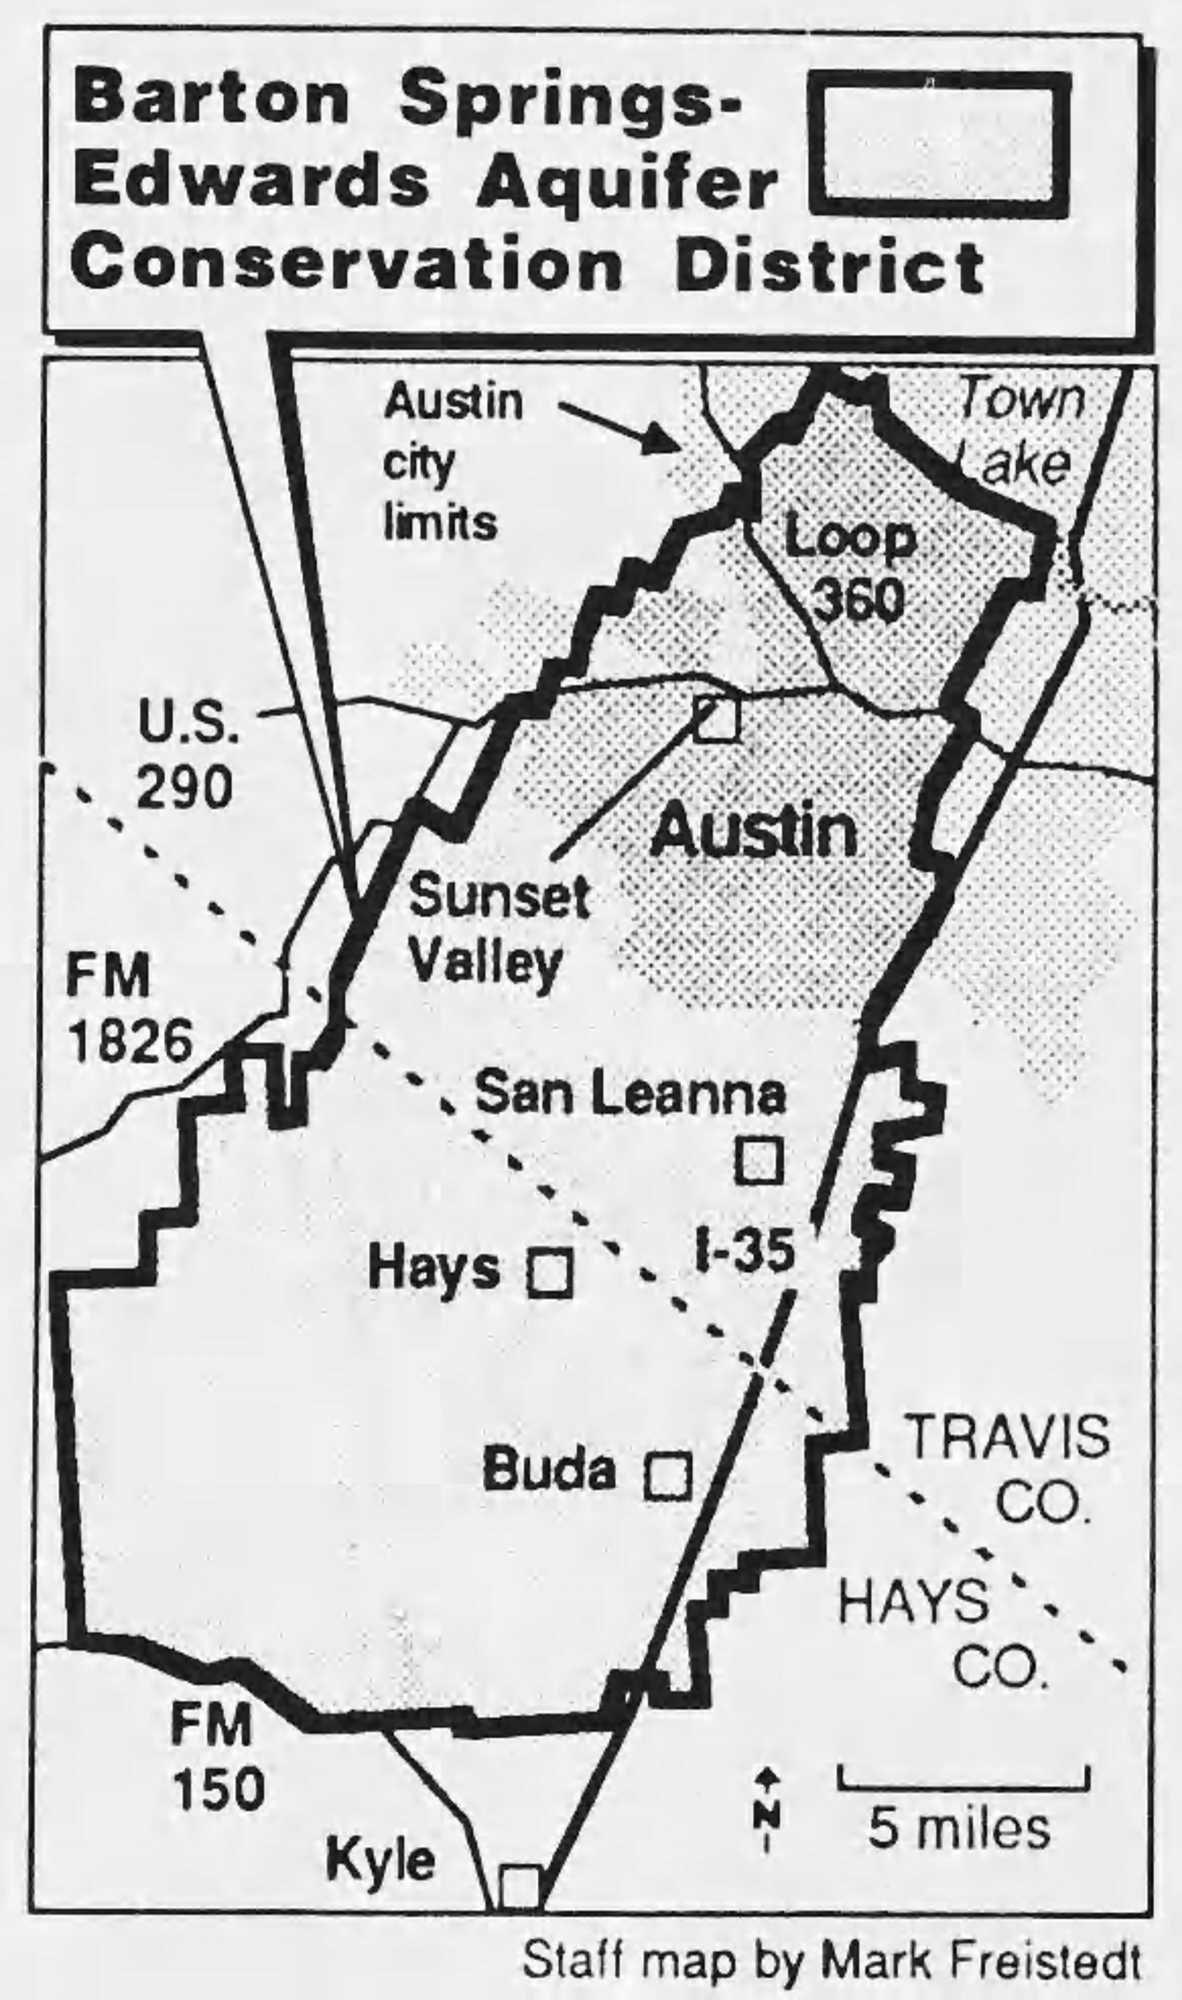 The new district covers an area from the Colorado River south almost to the city of Kyle. The eastern boundary roughly follows IH35 & the western edge extends almost to FM 1626. (Austin American-Statesman, February 26, 1987)